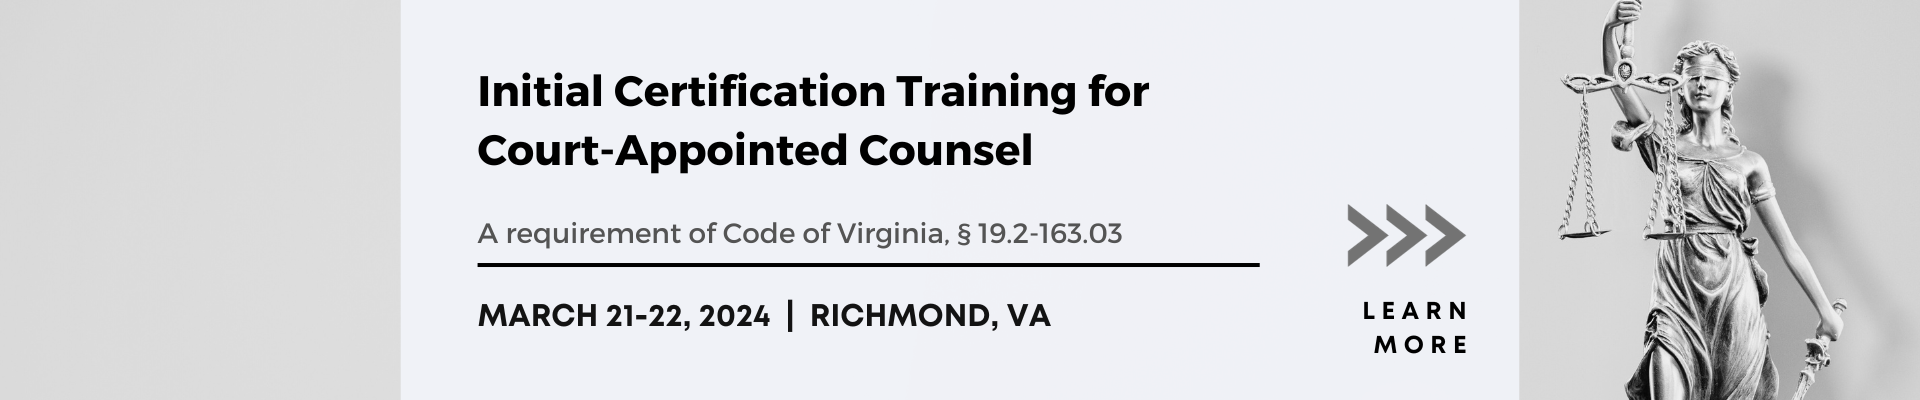 Initial Certification Training for Court-Appointed Counsel. A requirement of Code of Virginia, § 19.2-163.03